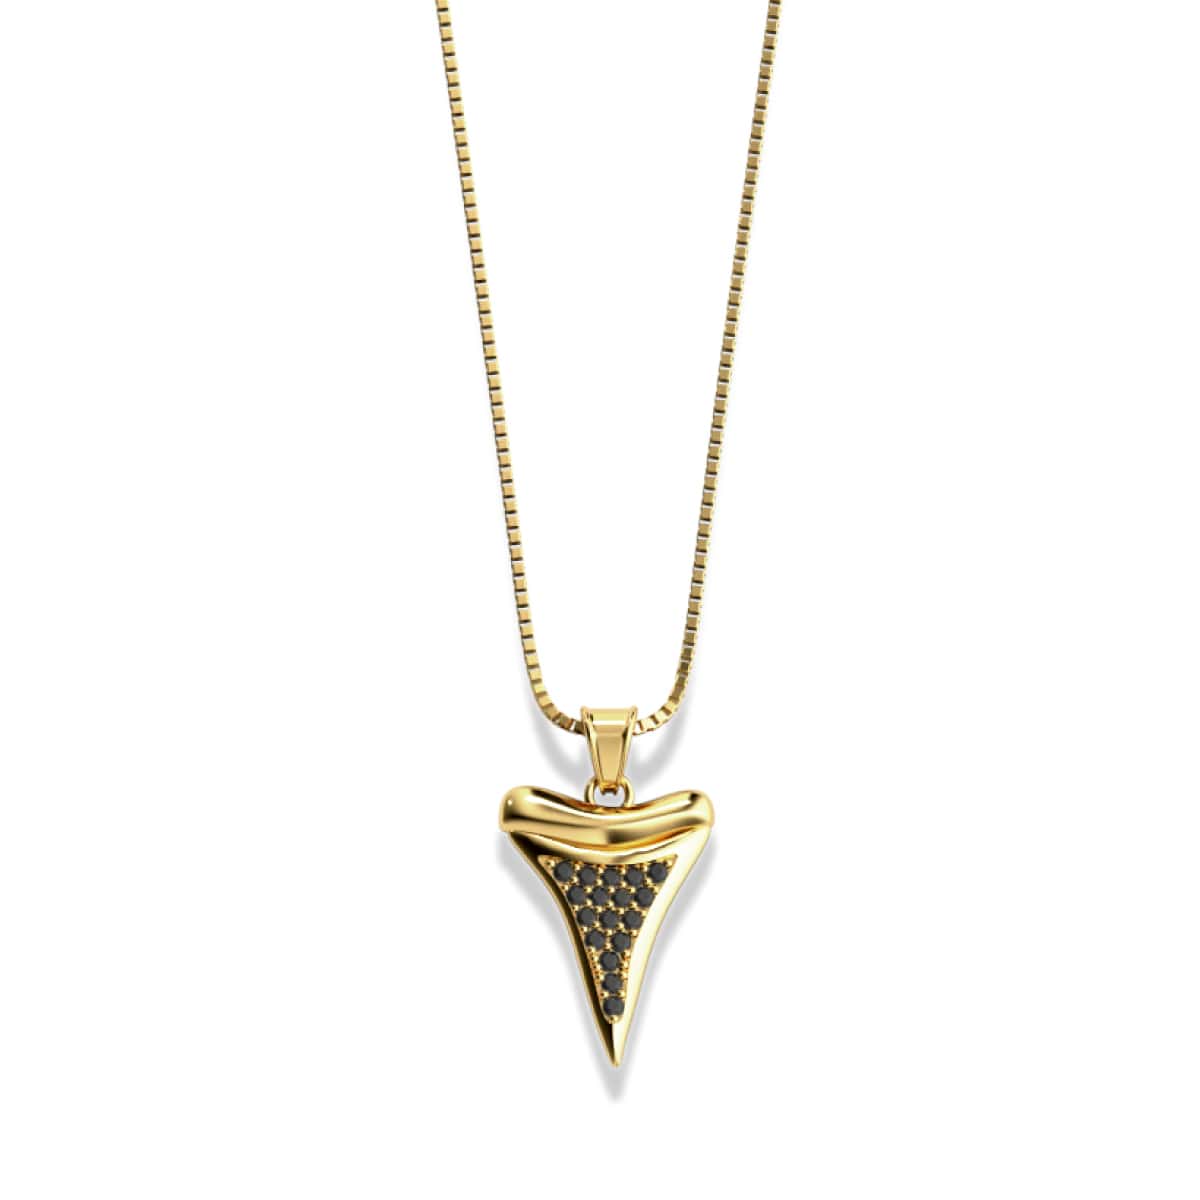 Image of Shark Tooth Infinity Clasp Necklace by Lauren Howe | .925 Sterling Gold Vermeil | Black Crystal